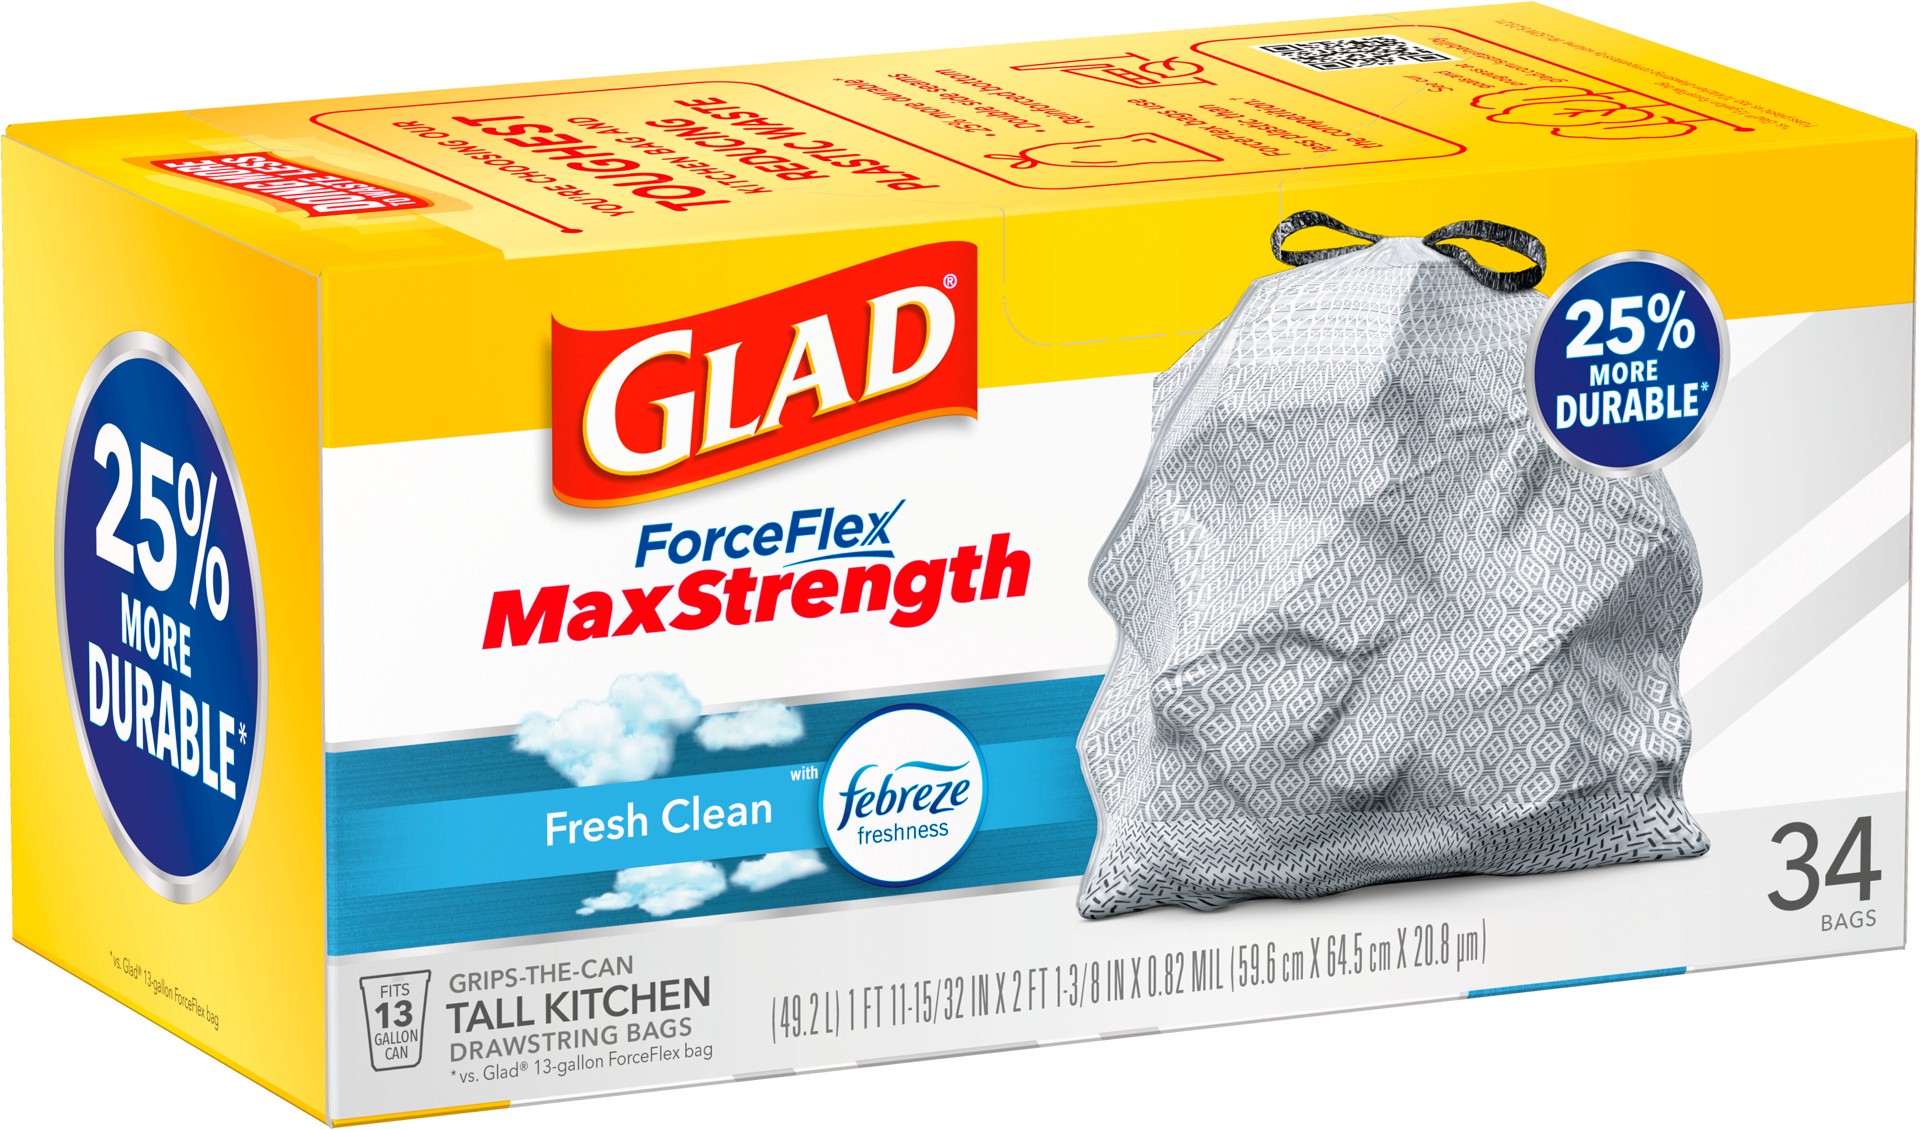 slide 5 of 5, Glad ForceFlex MaxStrength Tall Kitchen Drawstring Trash Bags, 13 Gallon, Fresh Clean Scent with Febreze Freshness, 34 Count, 34 ct